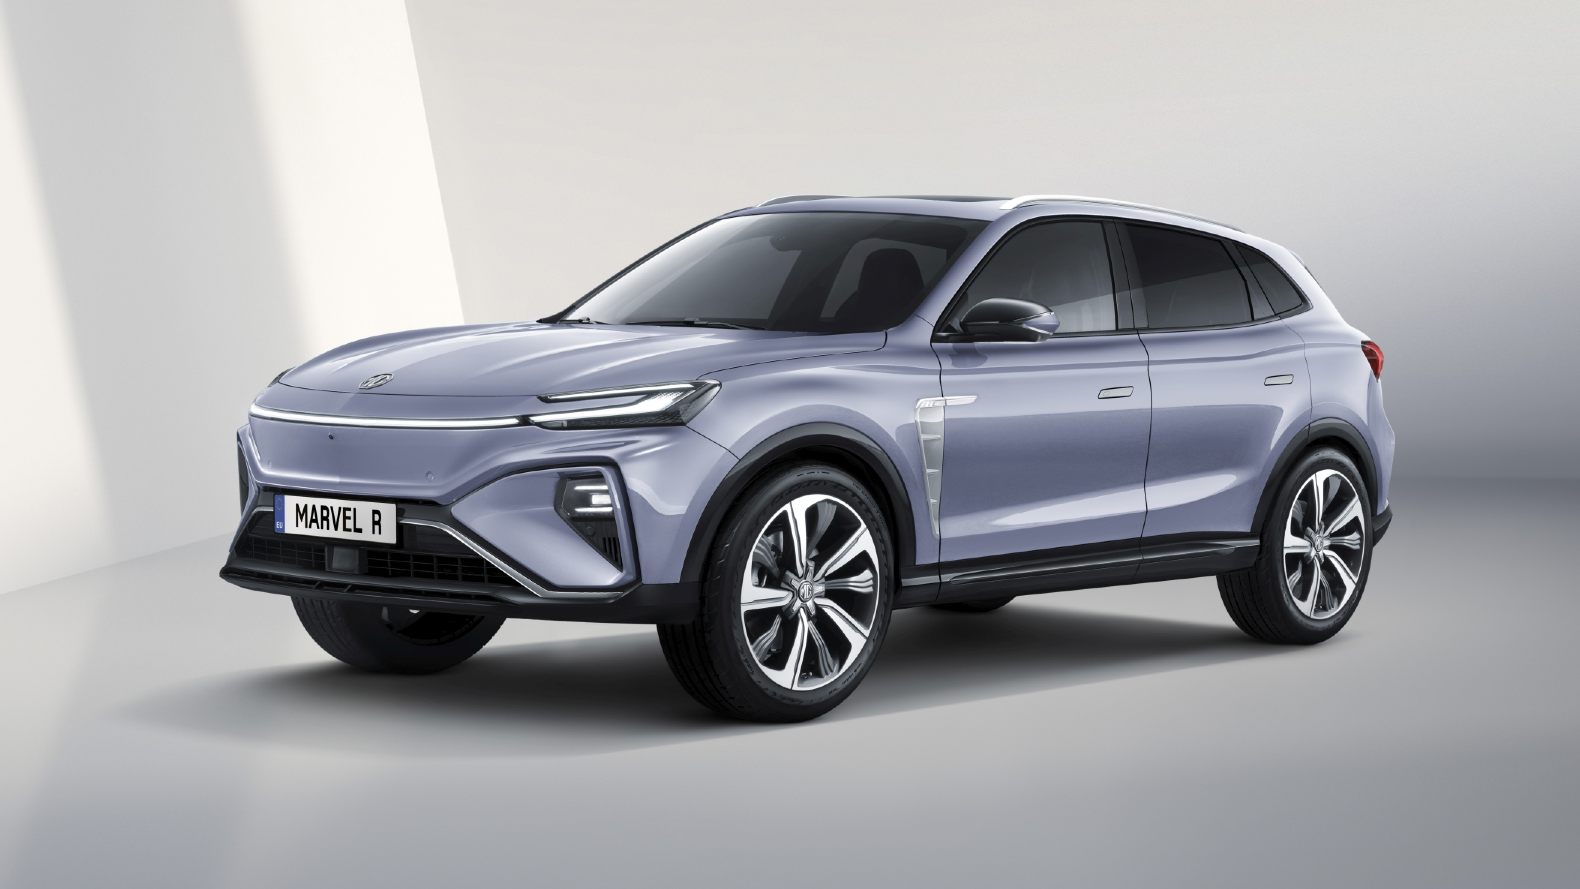  MG Marvel R electric SUV revealed as the successor to the Marvel X